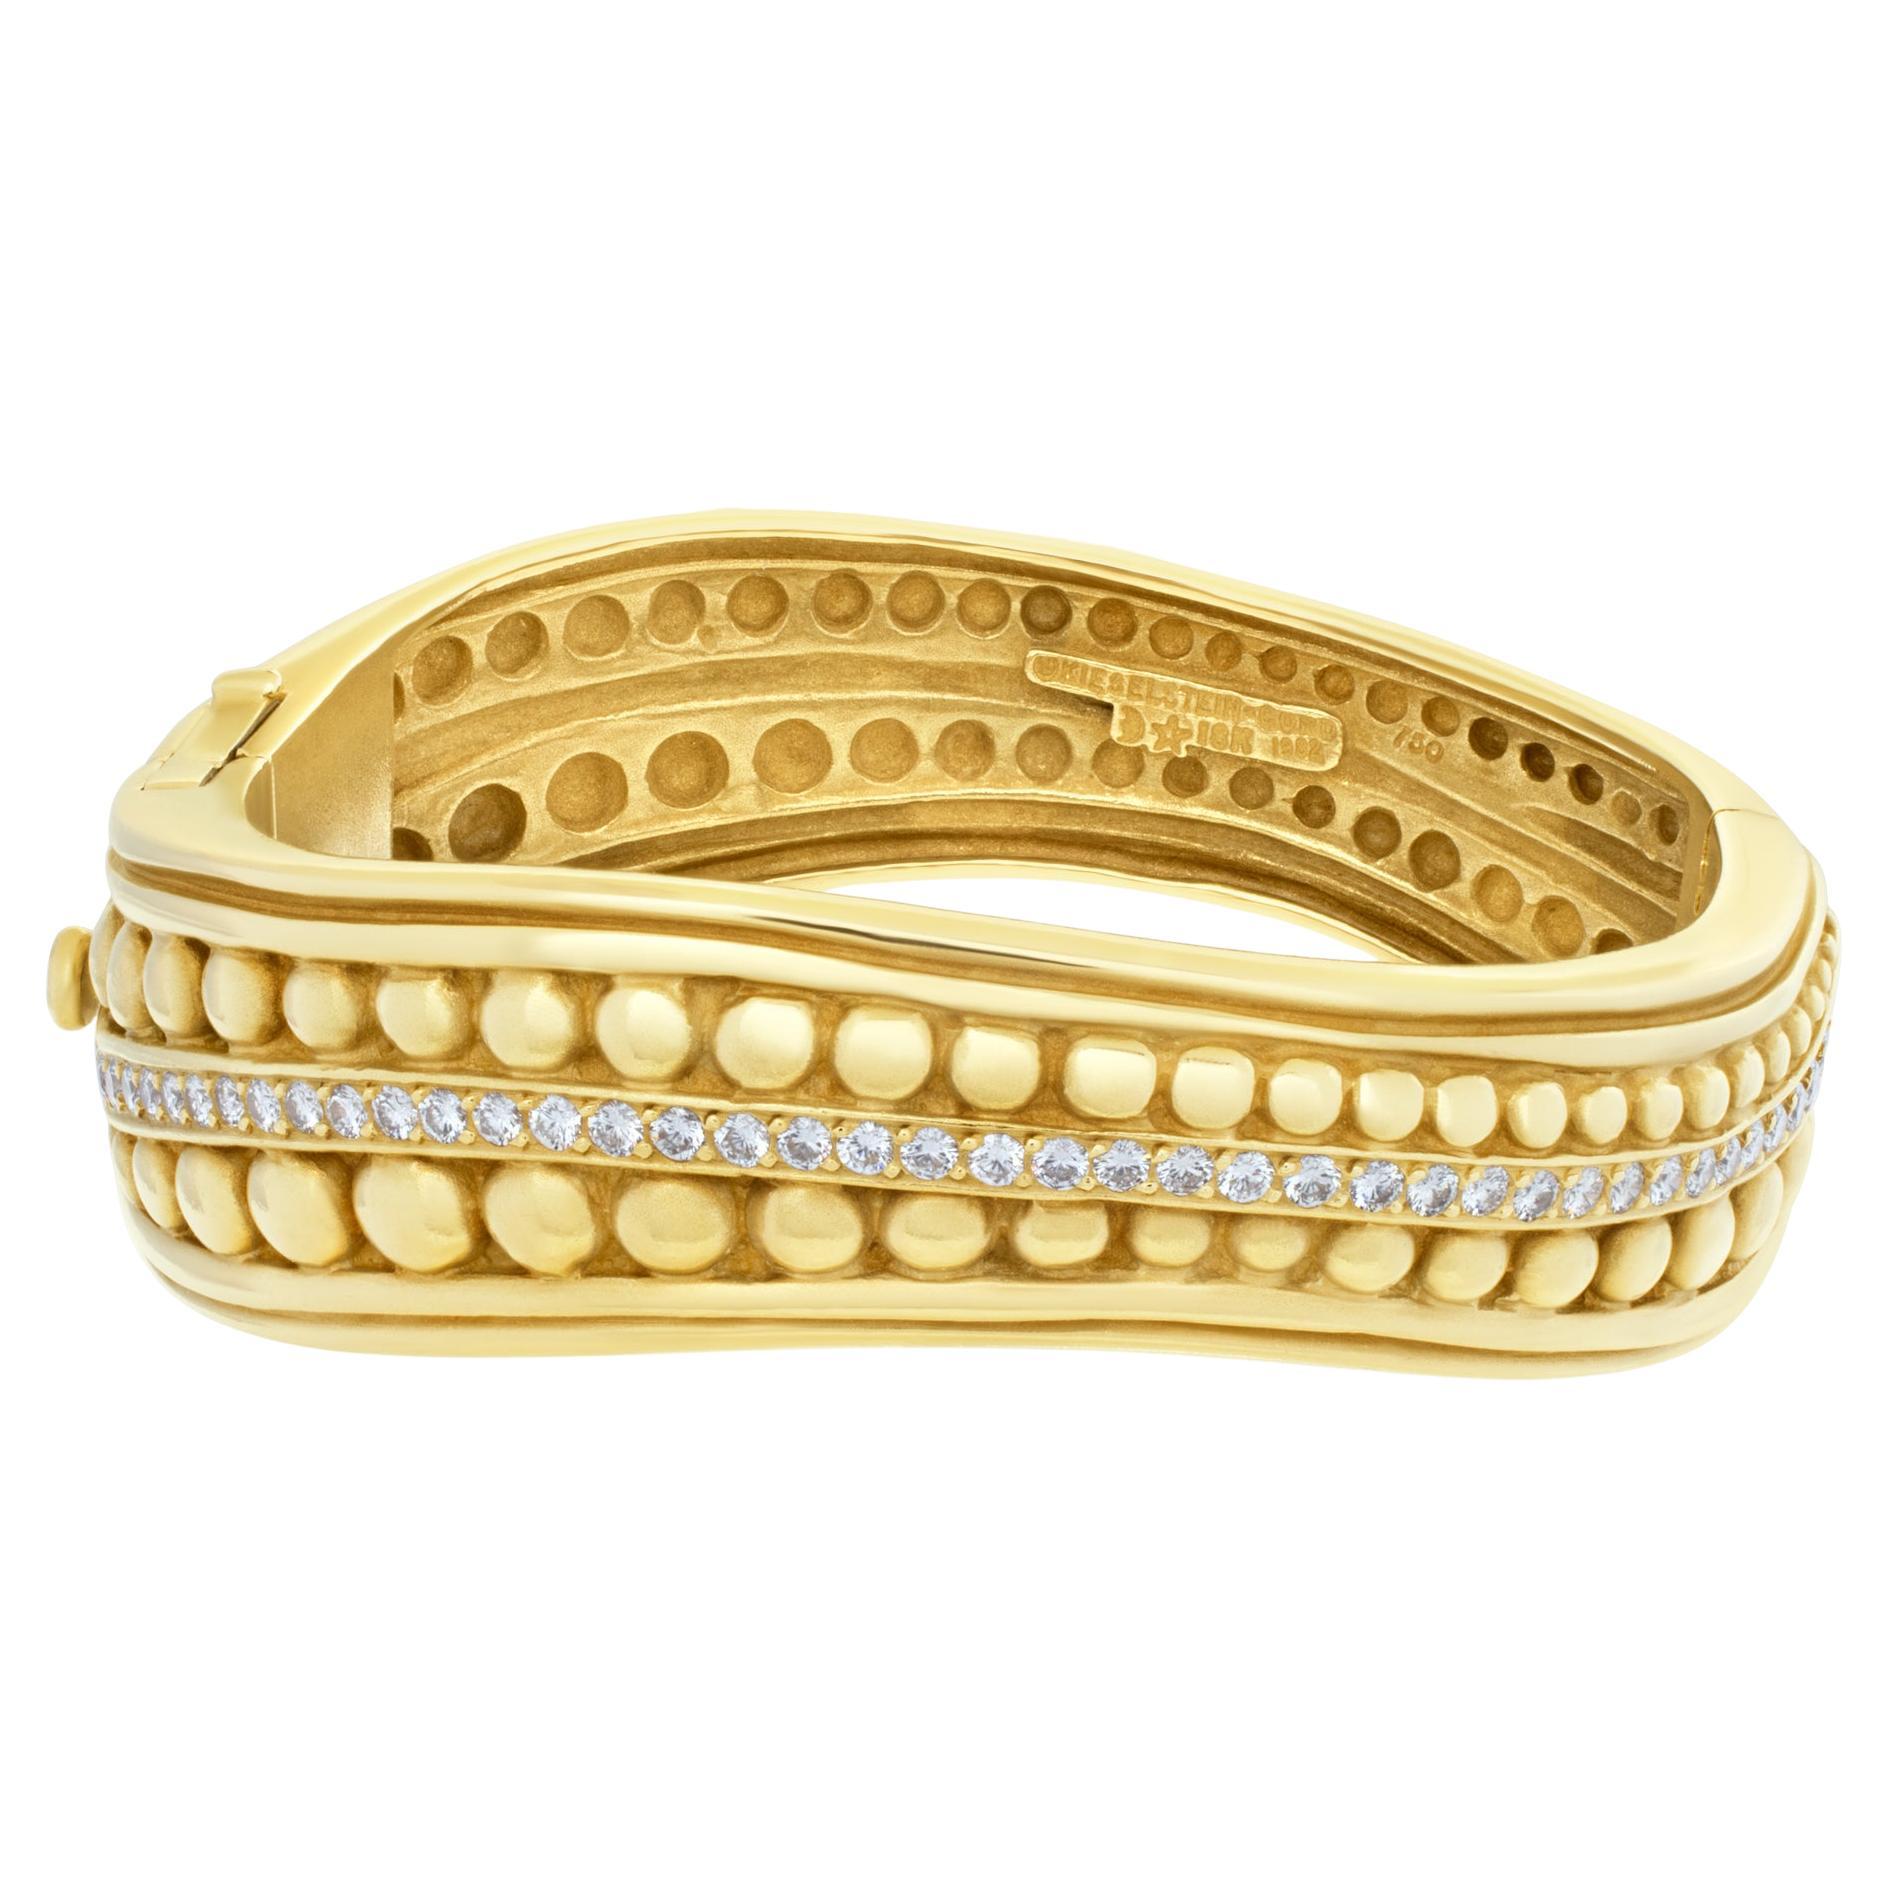 Kieselstein Cord Caviar bangle in 18k with over 2 carats in diamonds. For Sale